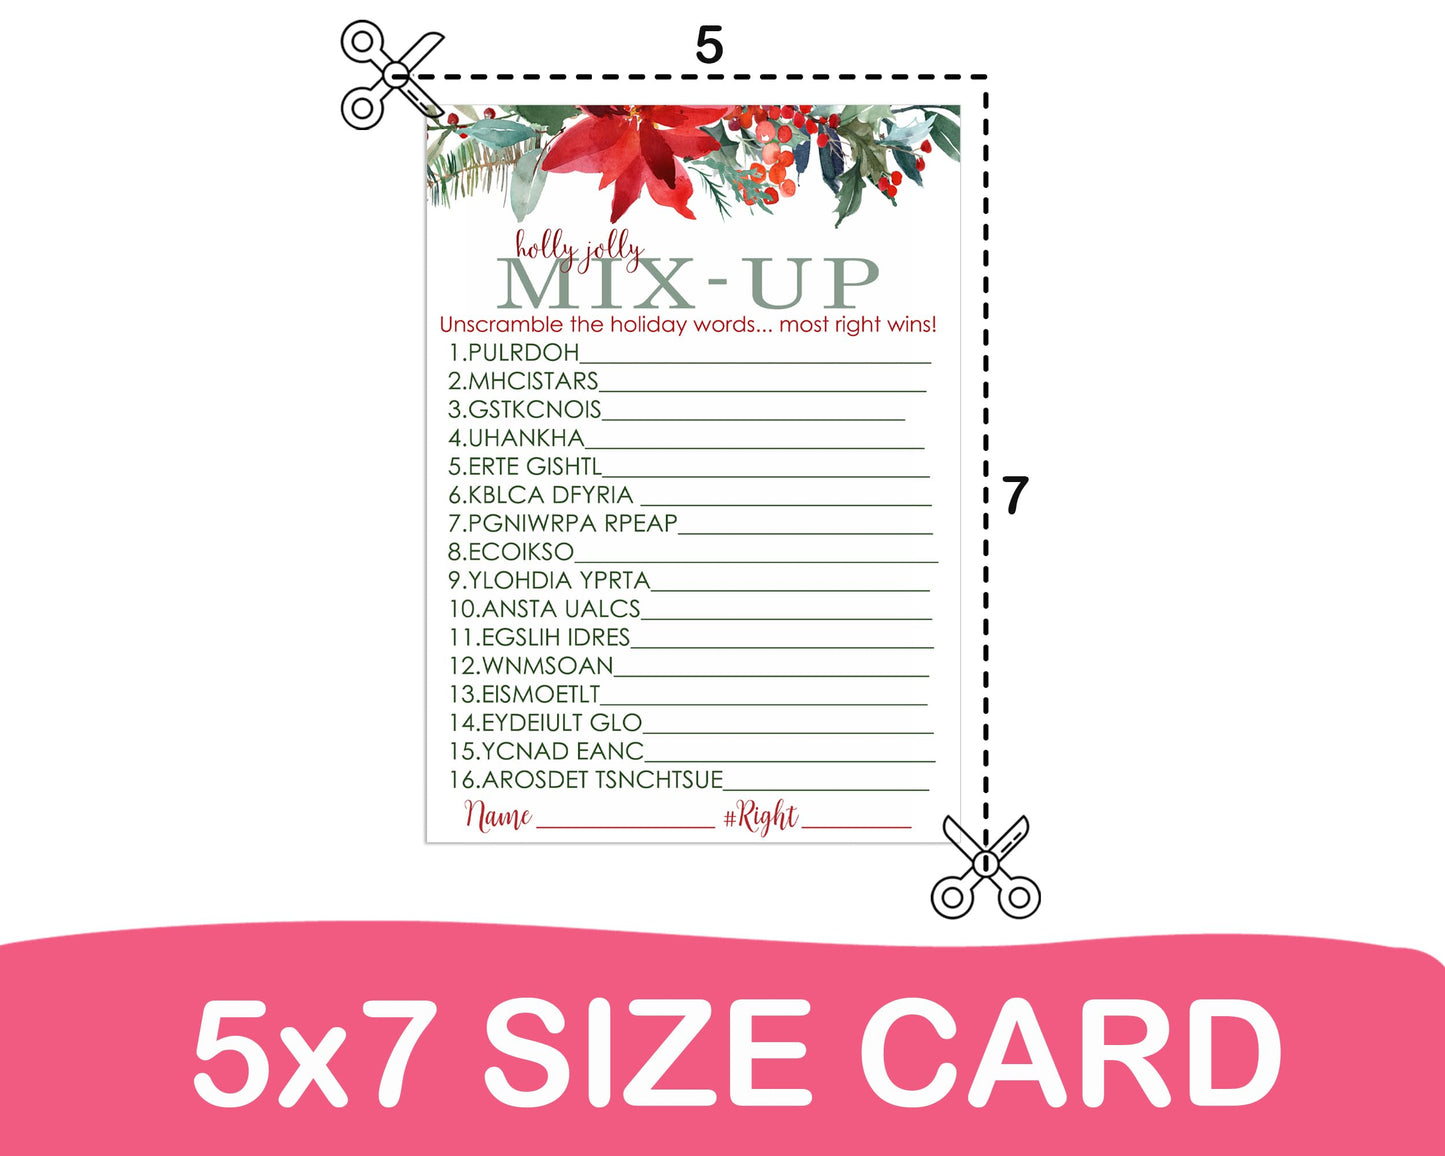 Adults, Groups, Office, 5x7 Cards, Rustic Xmas, 25 PackPaper Clever Party